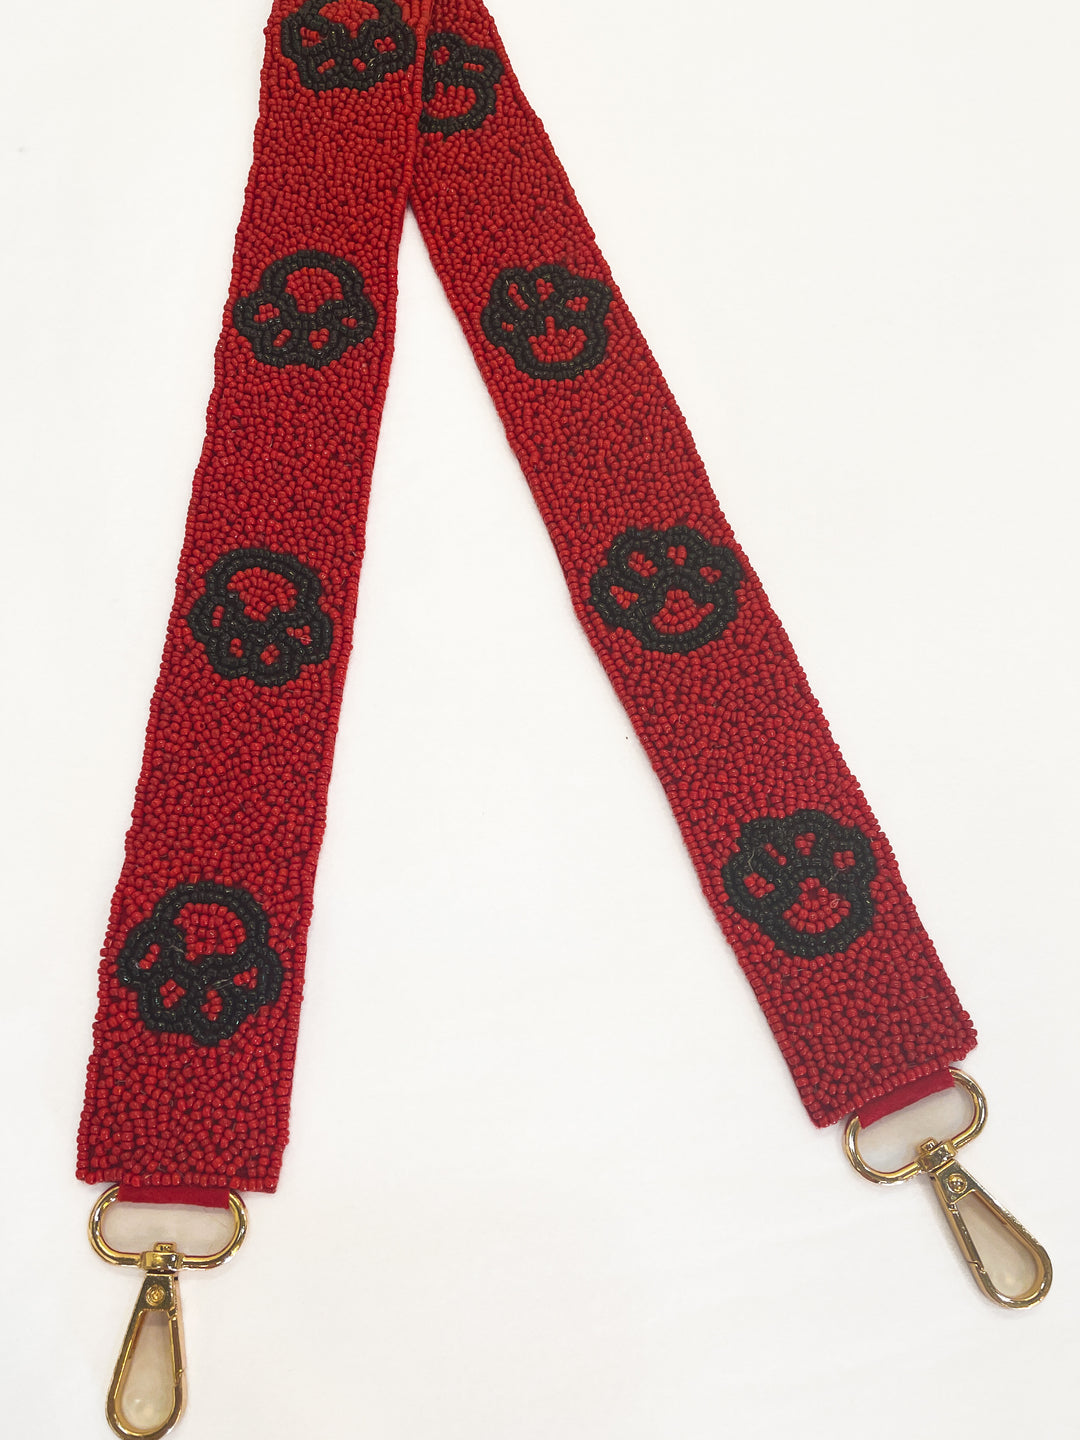 Paw Print Strap - Red and Black